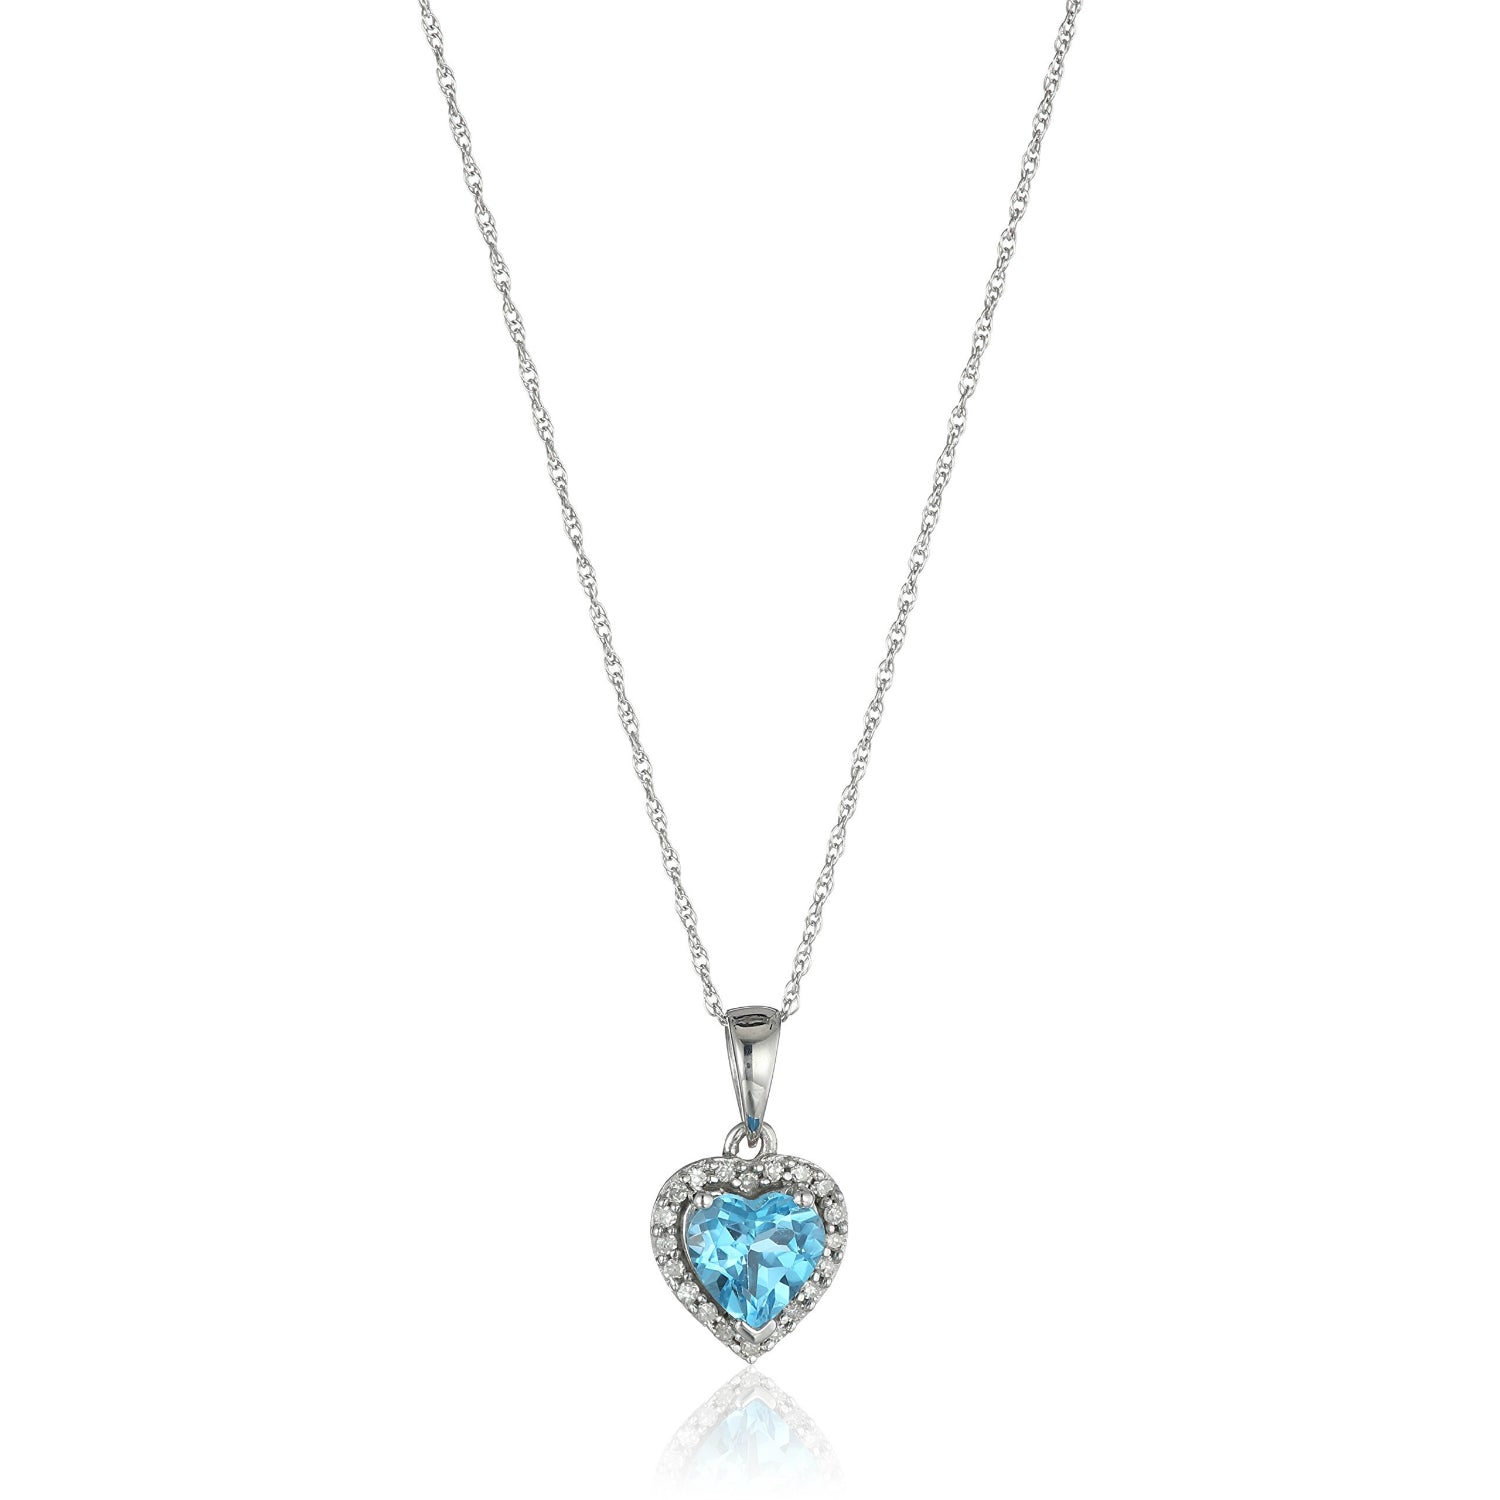 10k White Gold Swiss Blue Topaz Heart and Diamond Pendant Necklace, (1/10 cttw H-I Color, I1-I2 Clarity), 18" - pinctore